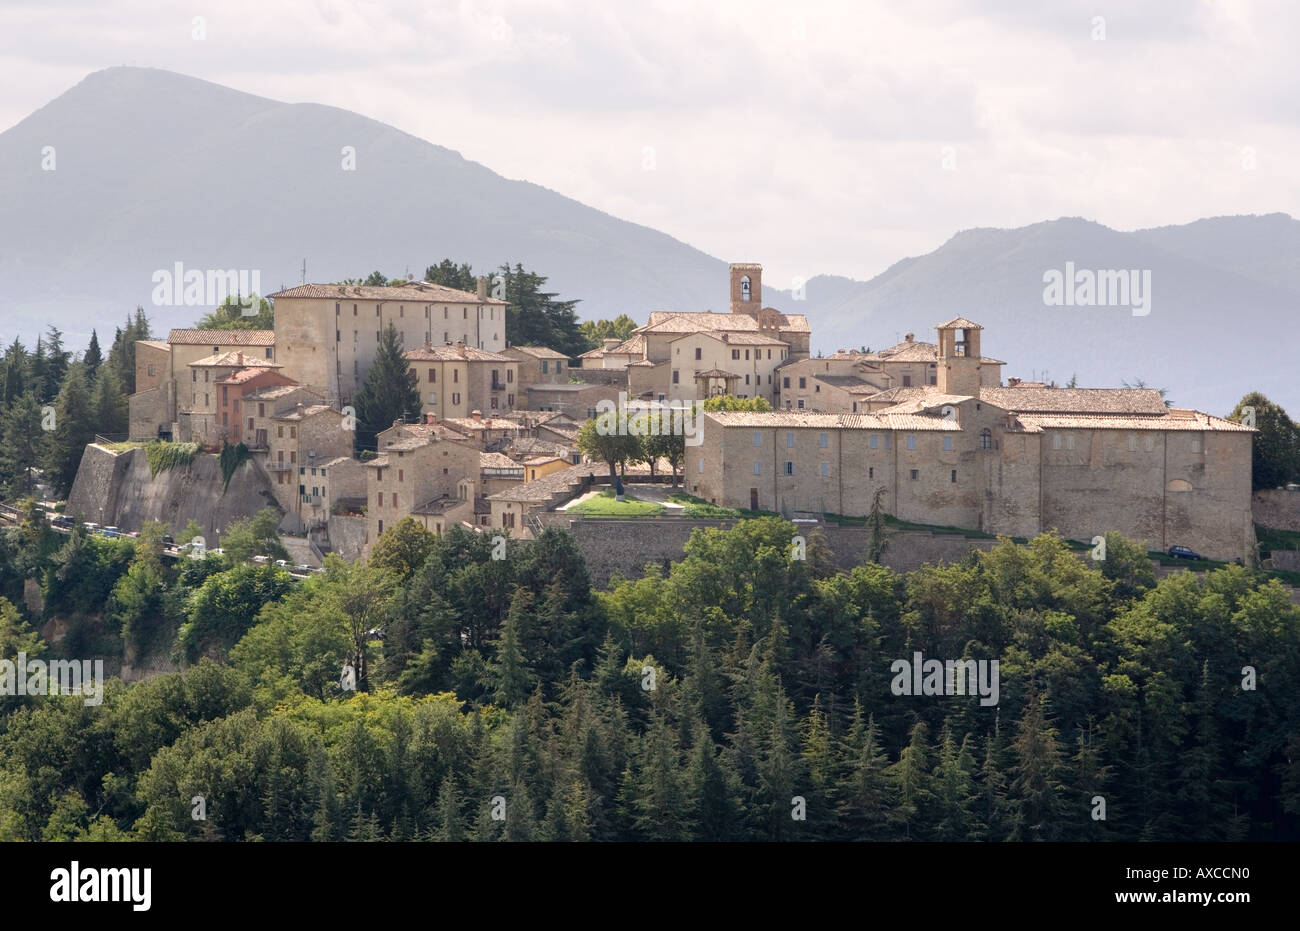 The Umbrian hill town of Montone Italy Stock Photo - Alamy